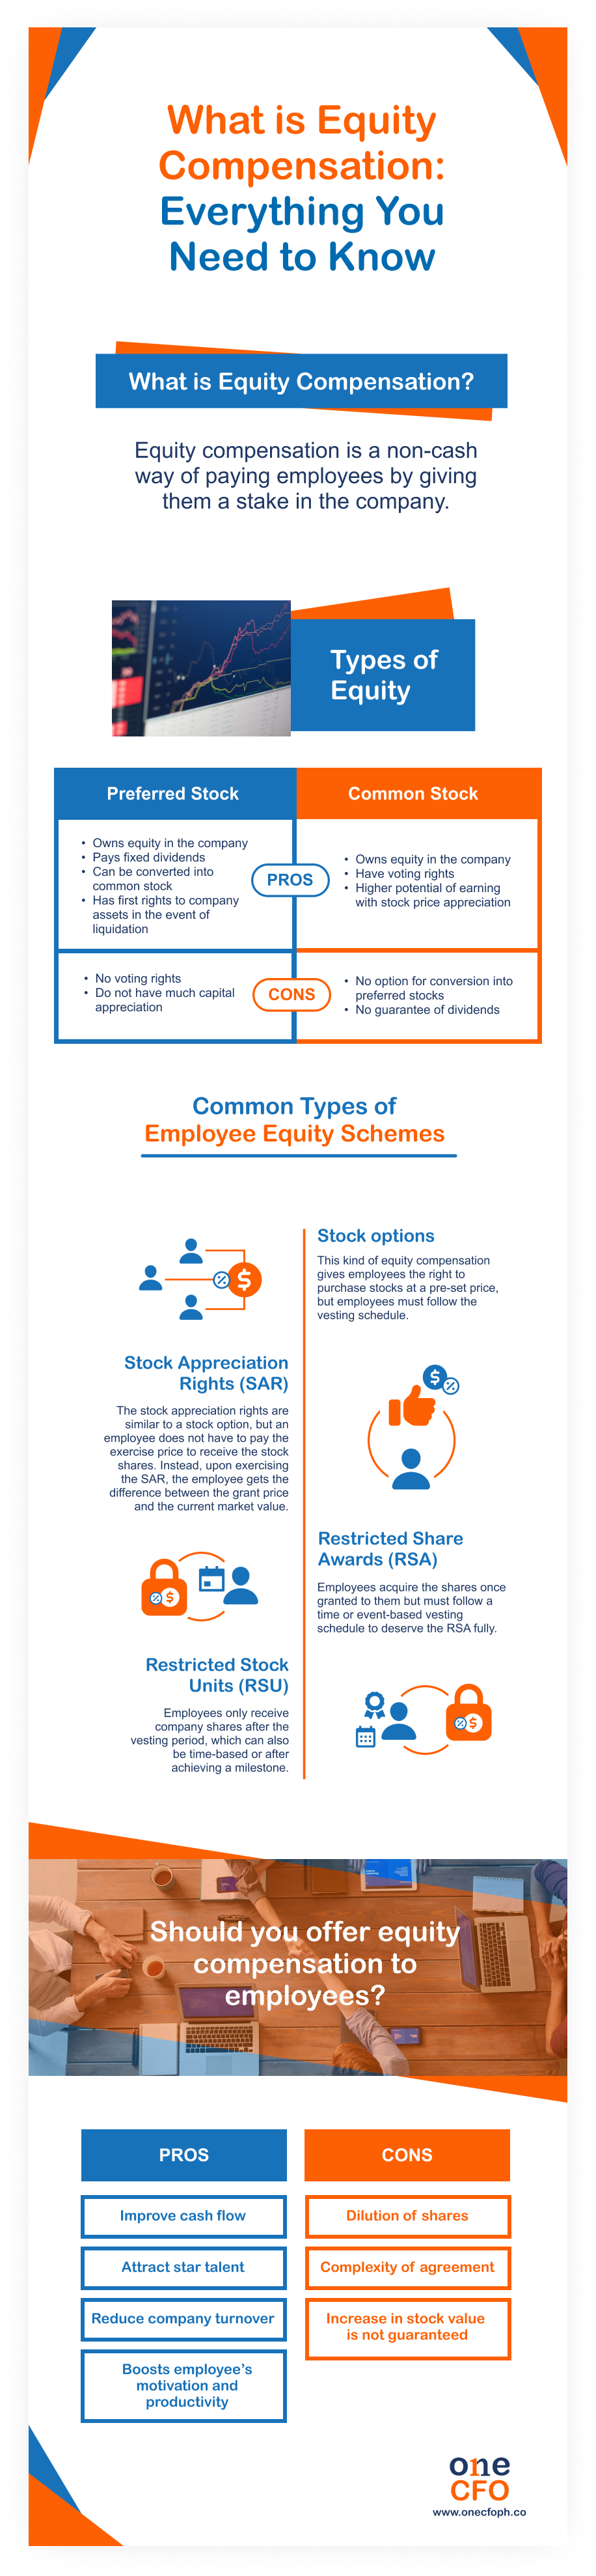 What is equity compensation? What options do founders have on employee equity schemes? Know the details before giving shares to your employees.